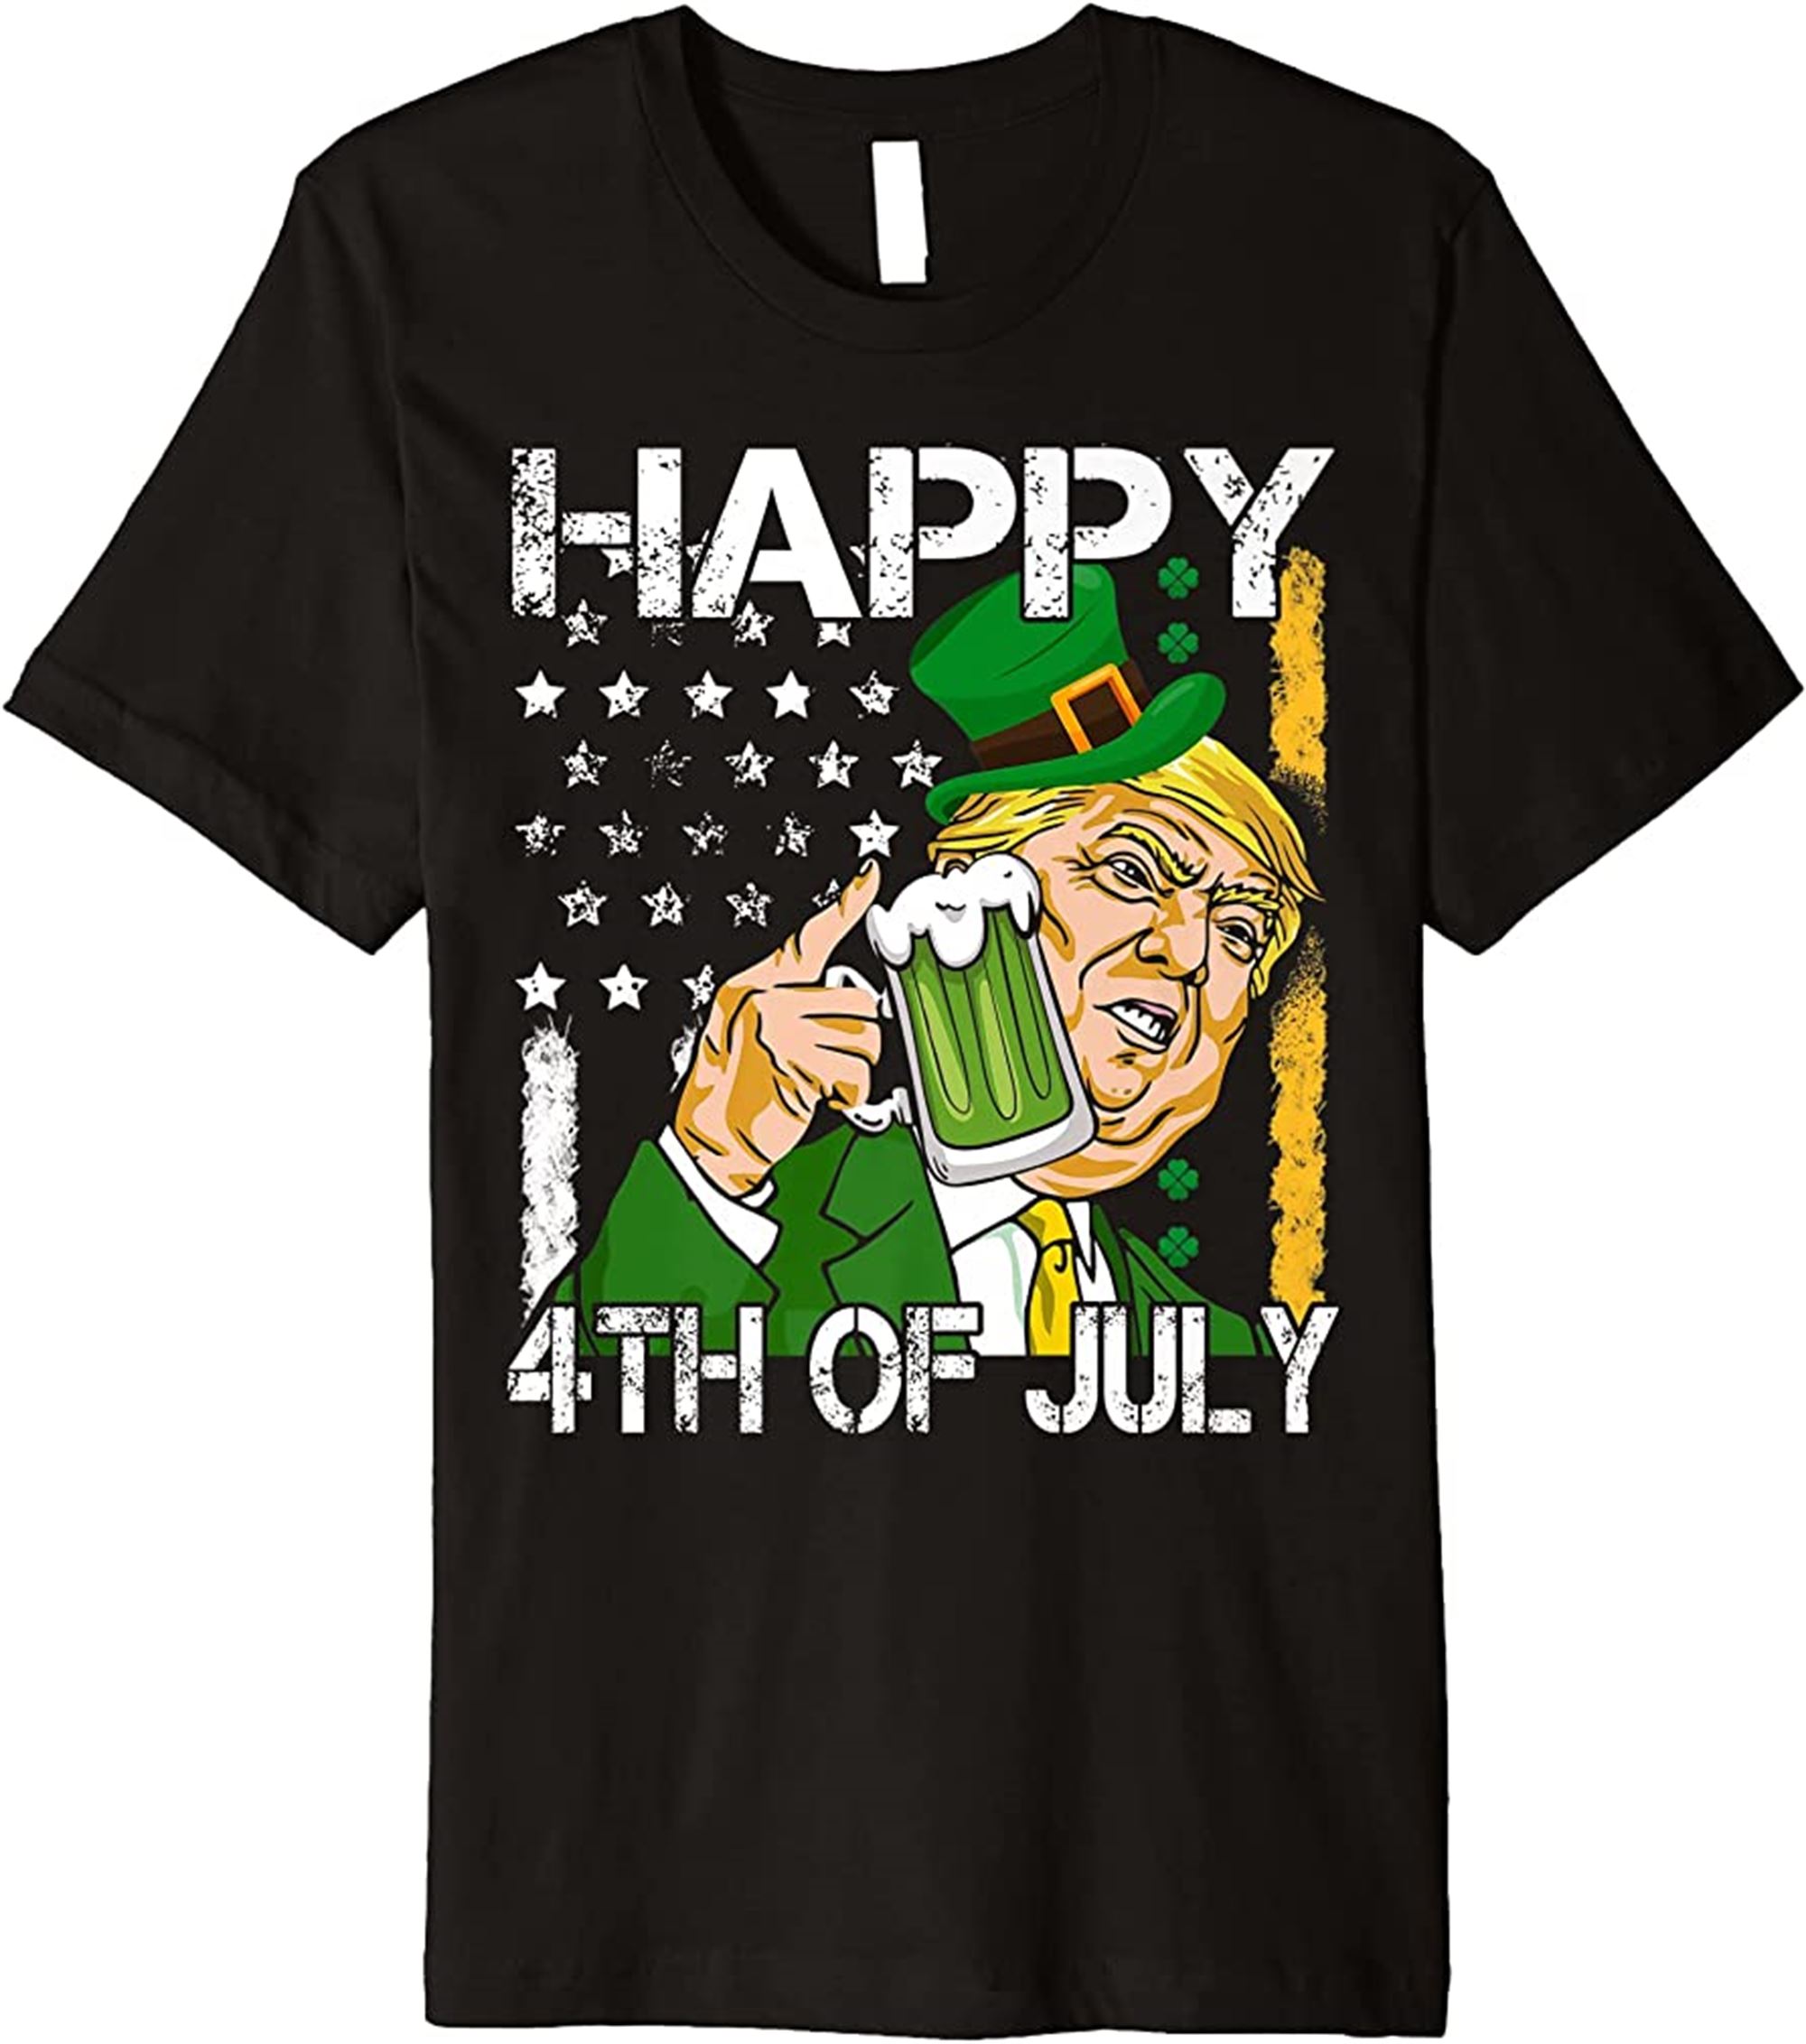 Happy 4th Of July Trump St Patricks Day America Flag Premium T-shirt Full Size Up To 5xl